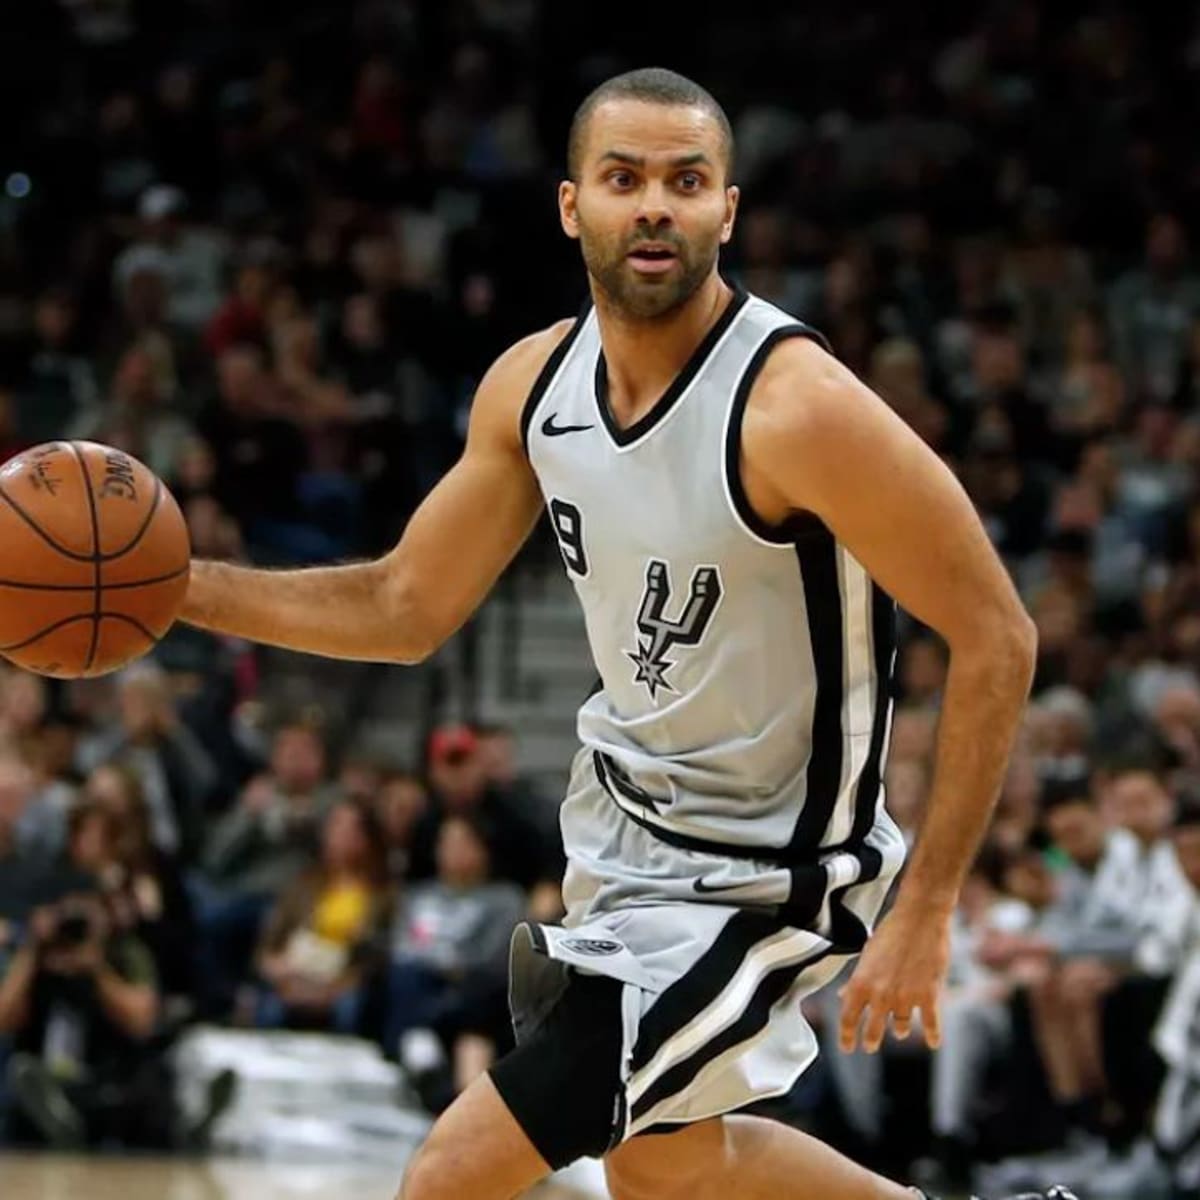 An Ode to Tony Parker, a Player Who Spurs Fans Trusted - The Ringer